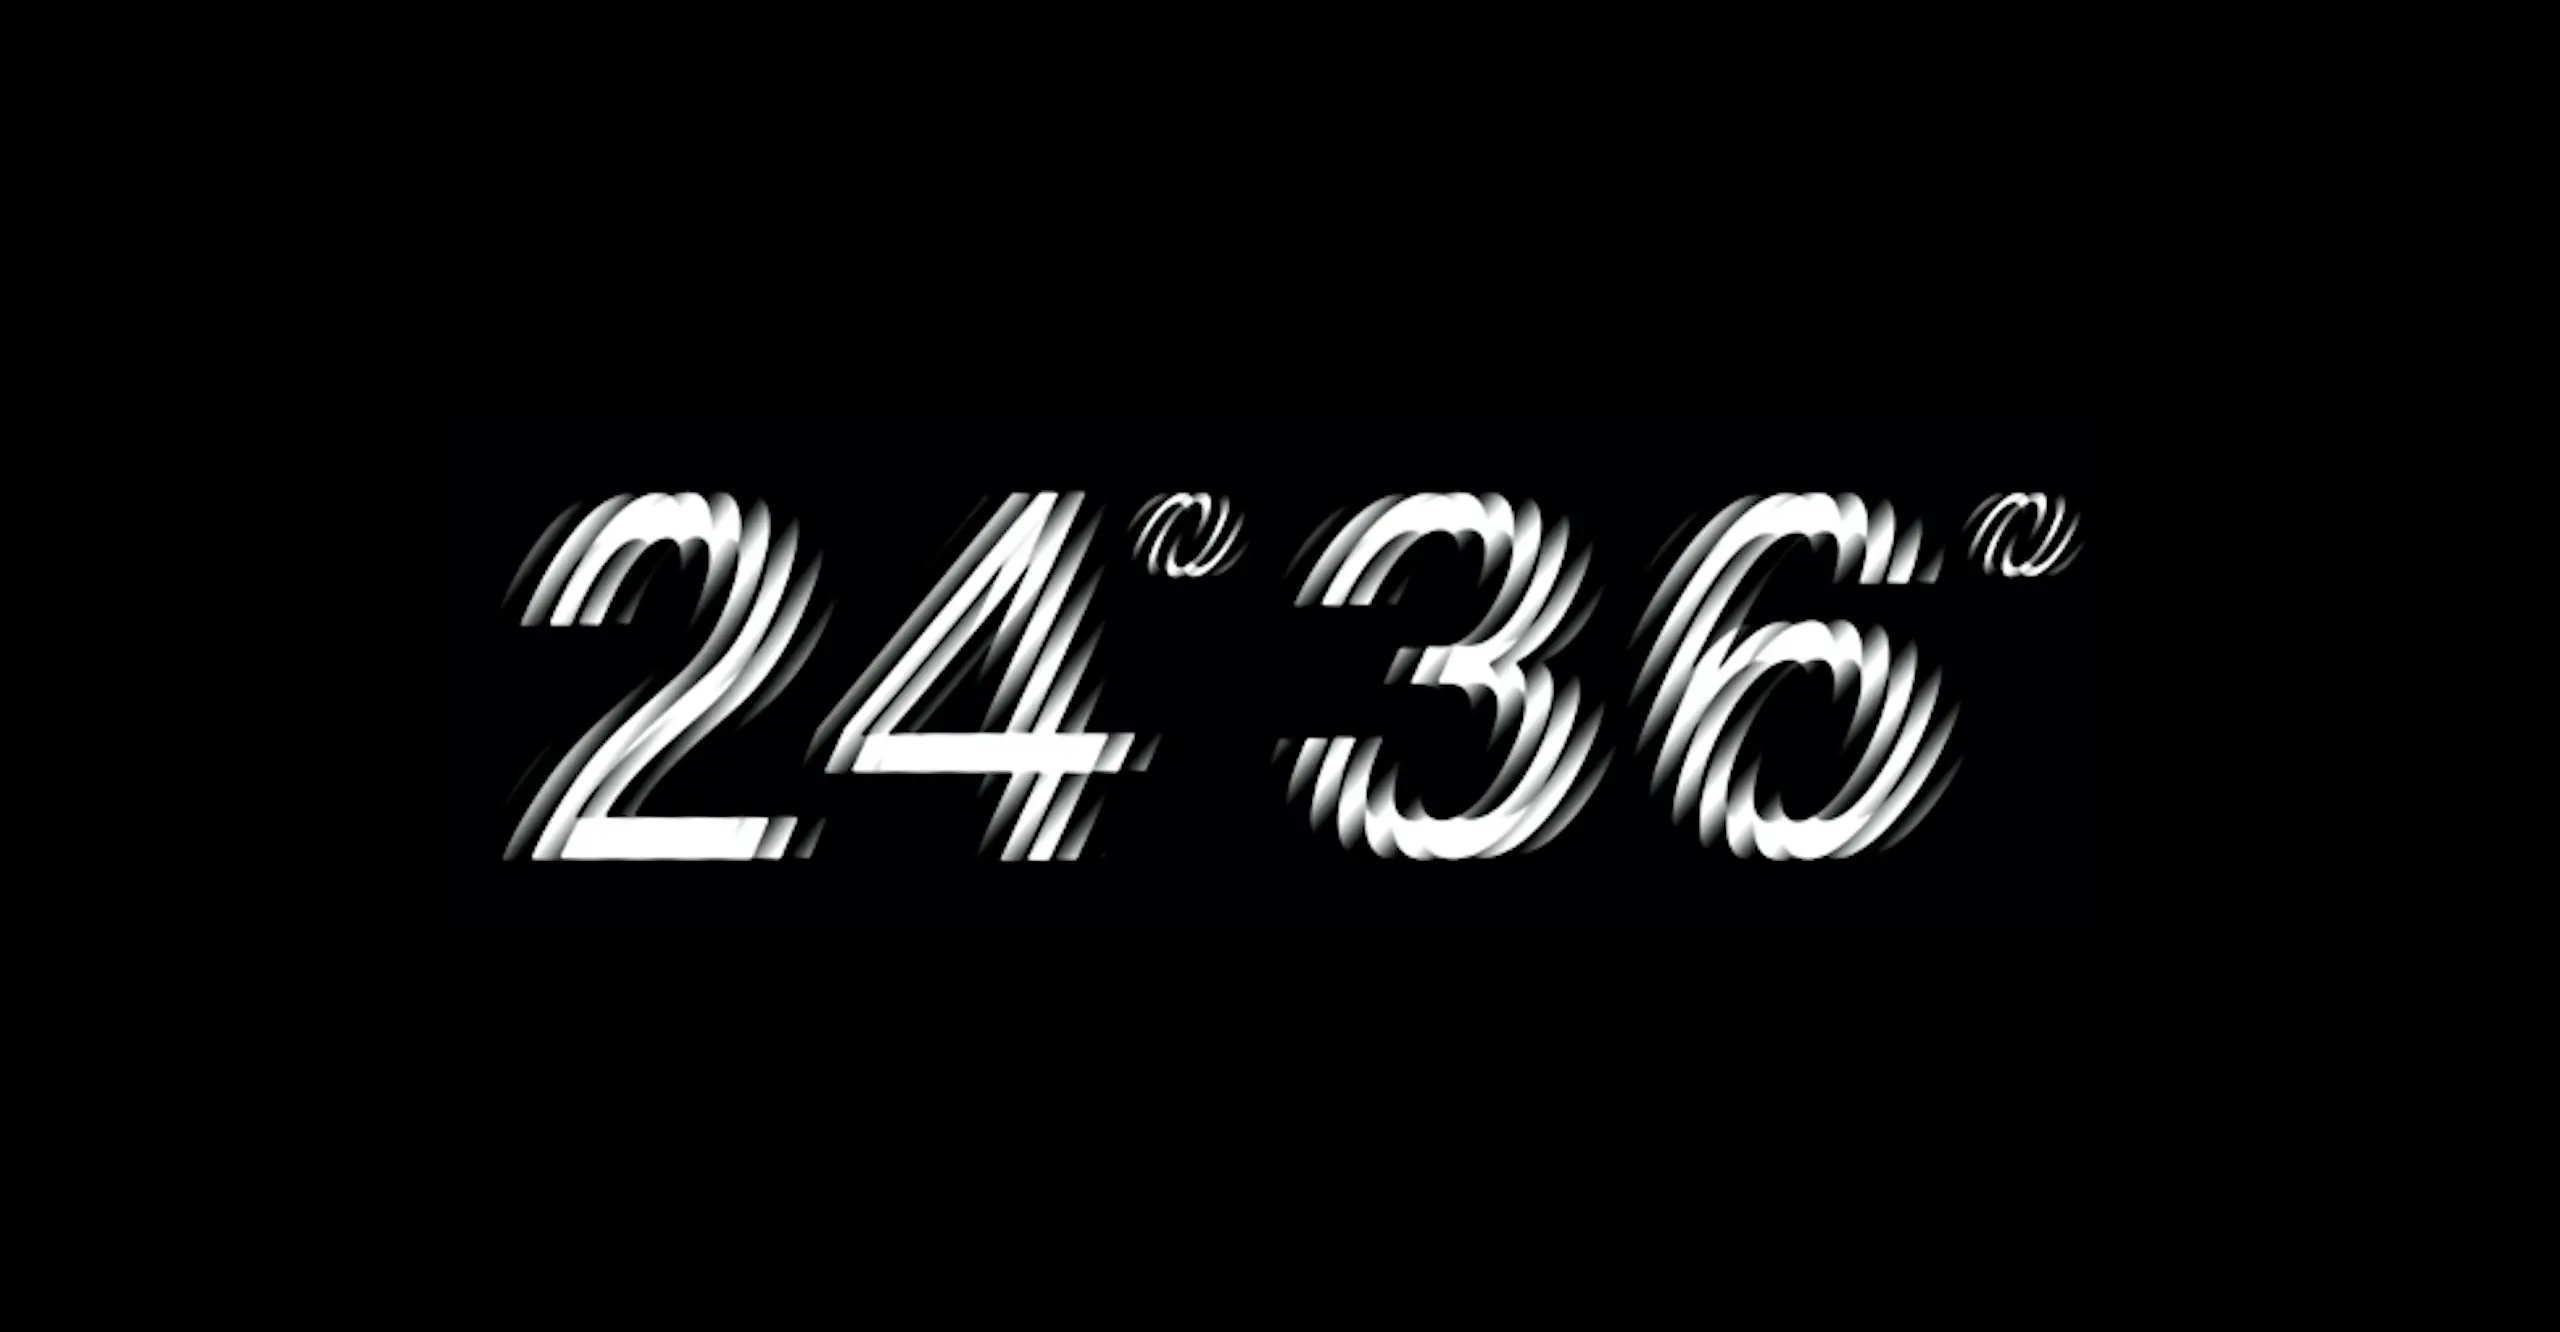 A black and white graphic of numbers 24 and 36.